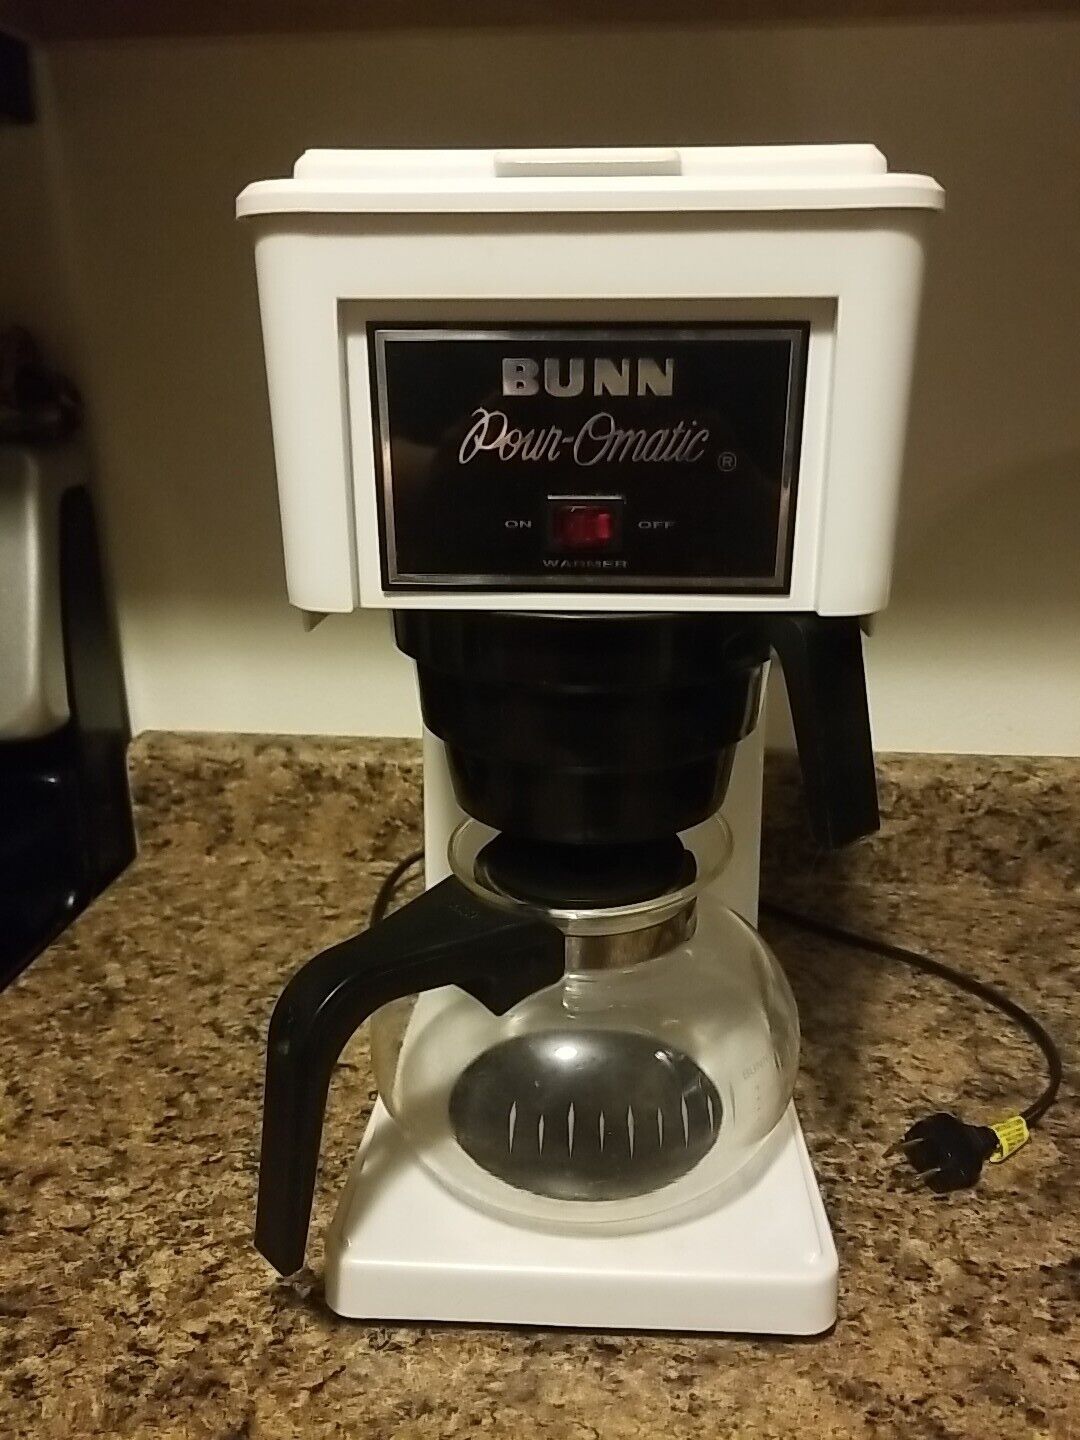 Vintage Bunn Home Model Coffee Maker Pour-Omatic